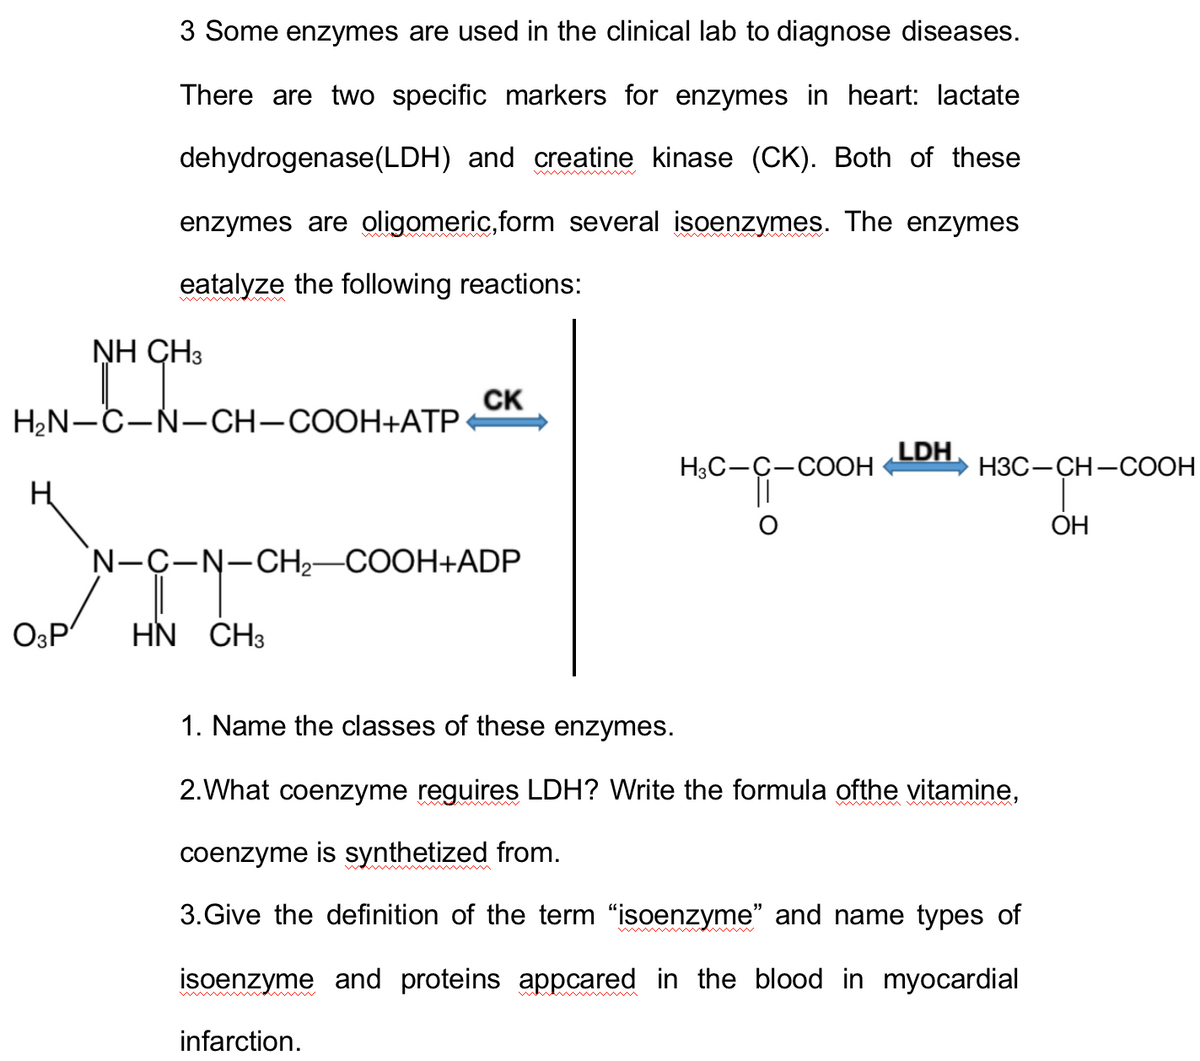 3 Some enzymes are used in the clinical lab to diagnose diseases.
There are two specific markers for enzymes in heart: lactate
dehydrogenase (LDH) and creatine kinase (CK). Both of these
enzymes are oligomeric,form several isoenzymes. The enzymes
eatalyze the following reactions:
O3P
NH CH3
H₂N-C-N-CH-COOH+ATP
CK
N-C-N-CH₂-COOH+ADP
HN CH3
H3C- -COOH
O
LDH
H3C-CH-COOH
1. Name the classes of these enzymes.
2.What coenzyme reguires LDH? Write the formula ofthe vitamine,
coenzyme is synthetized from.
3. Give the definition of the term "isoenzyme" and name types of
isoenzyme and proteins appcared in the blood in myocardial
infarction.
OH